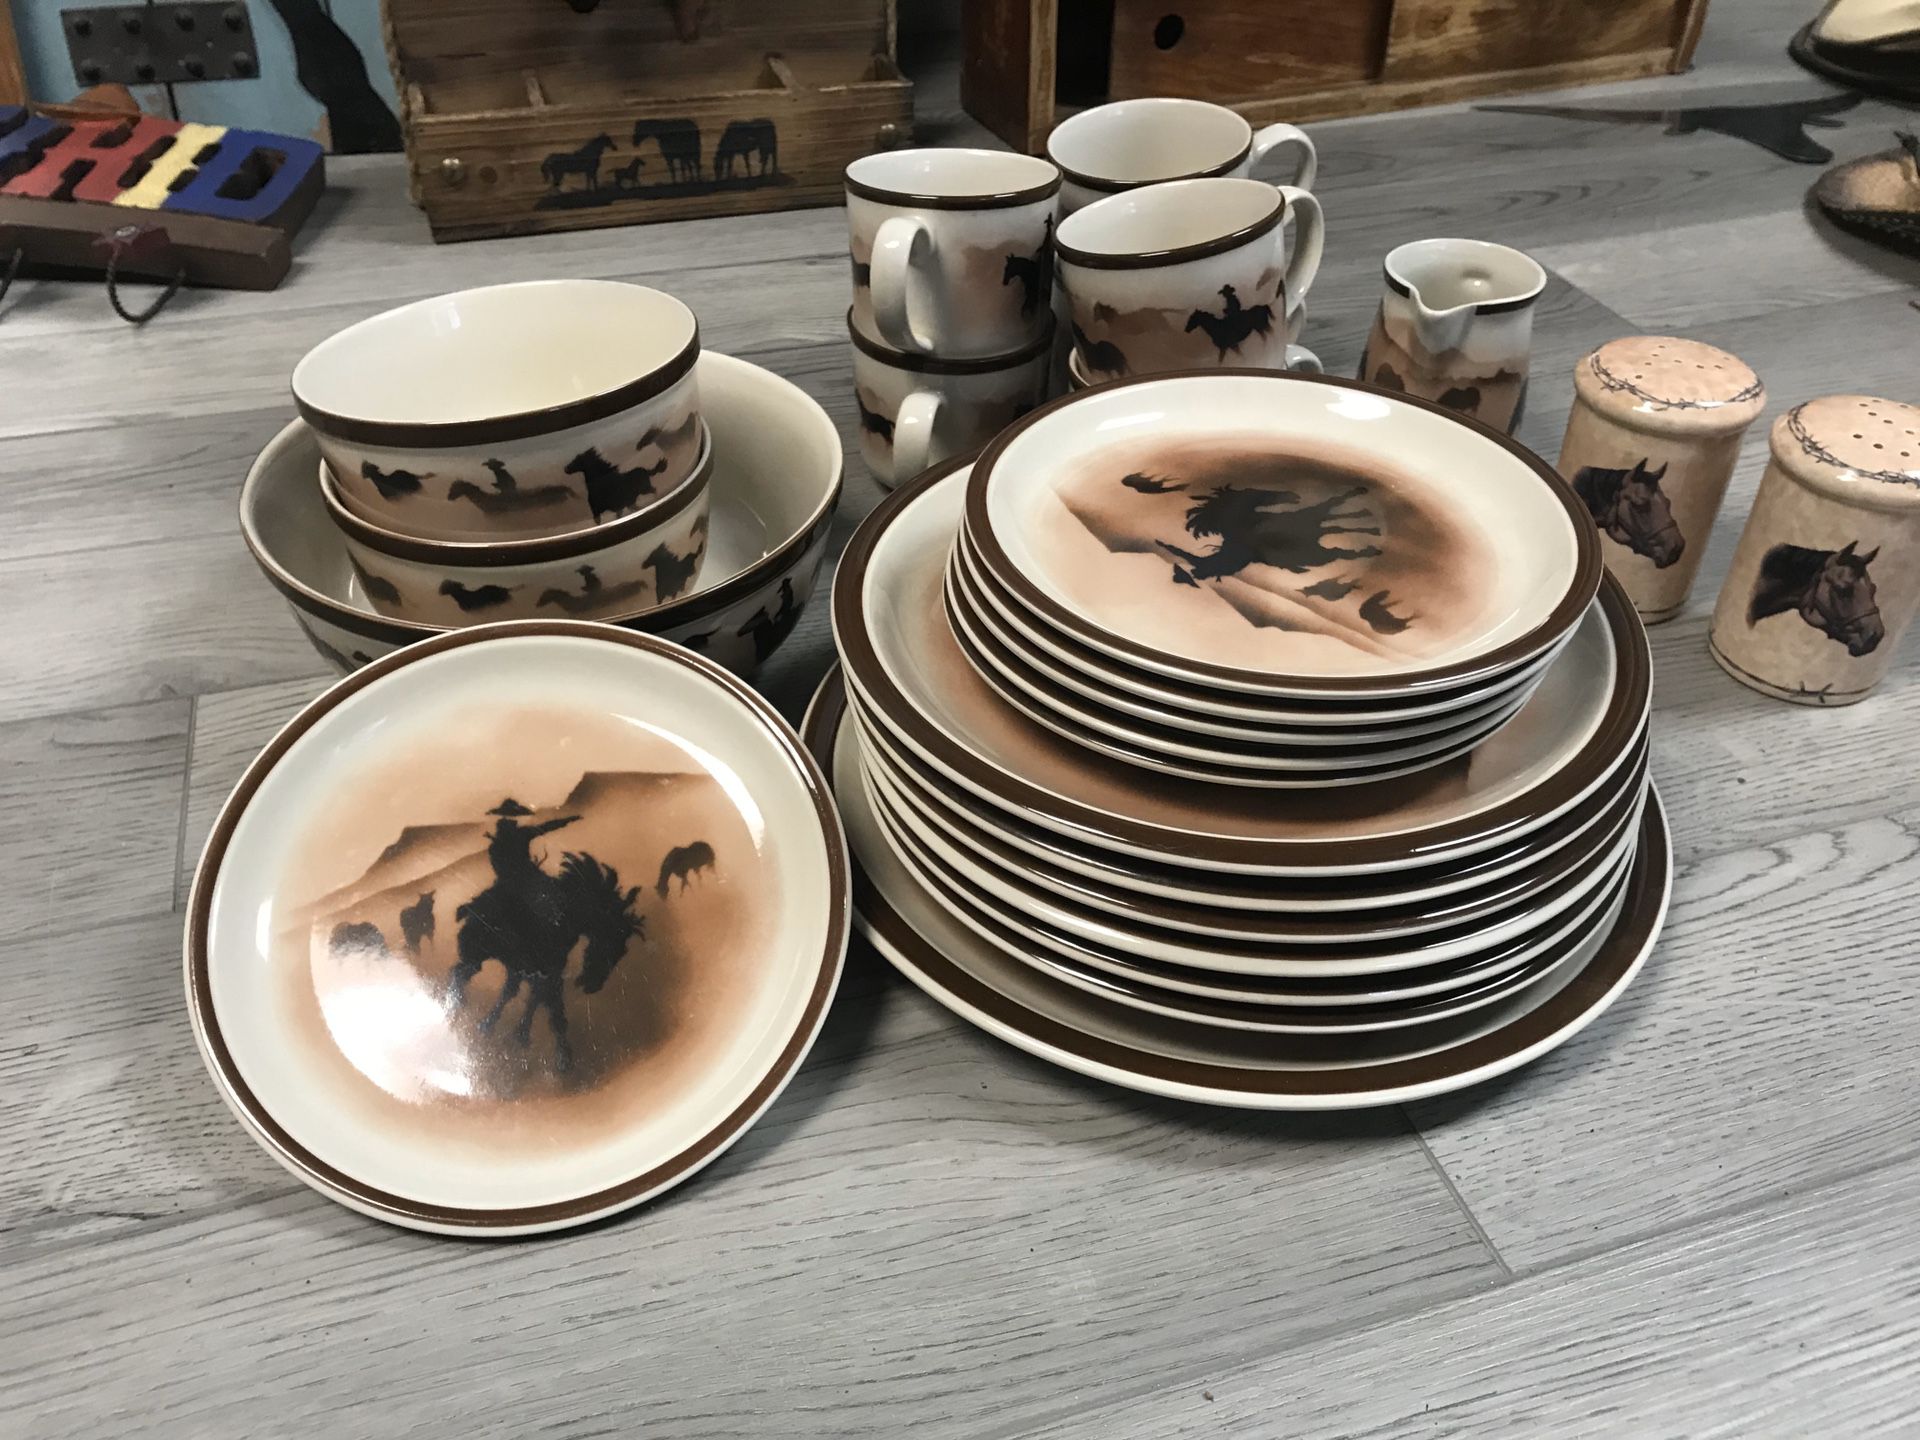 Western theme dishes